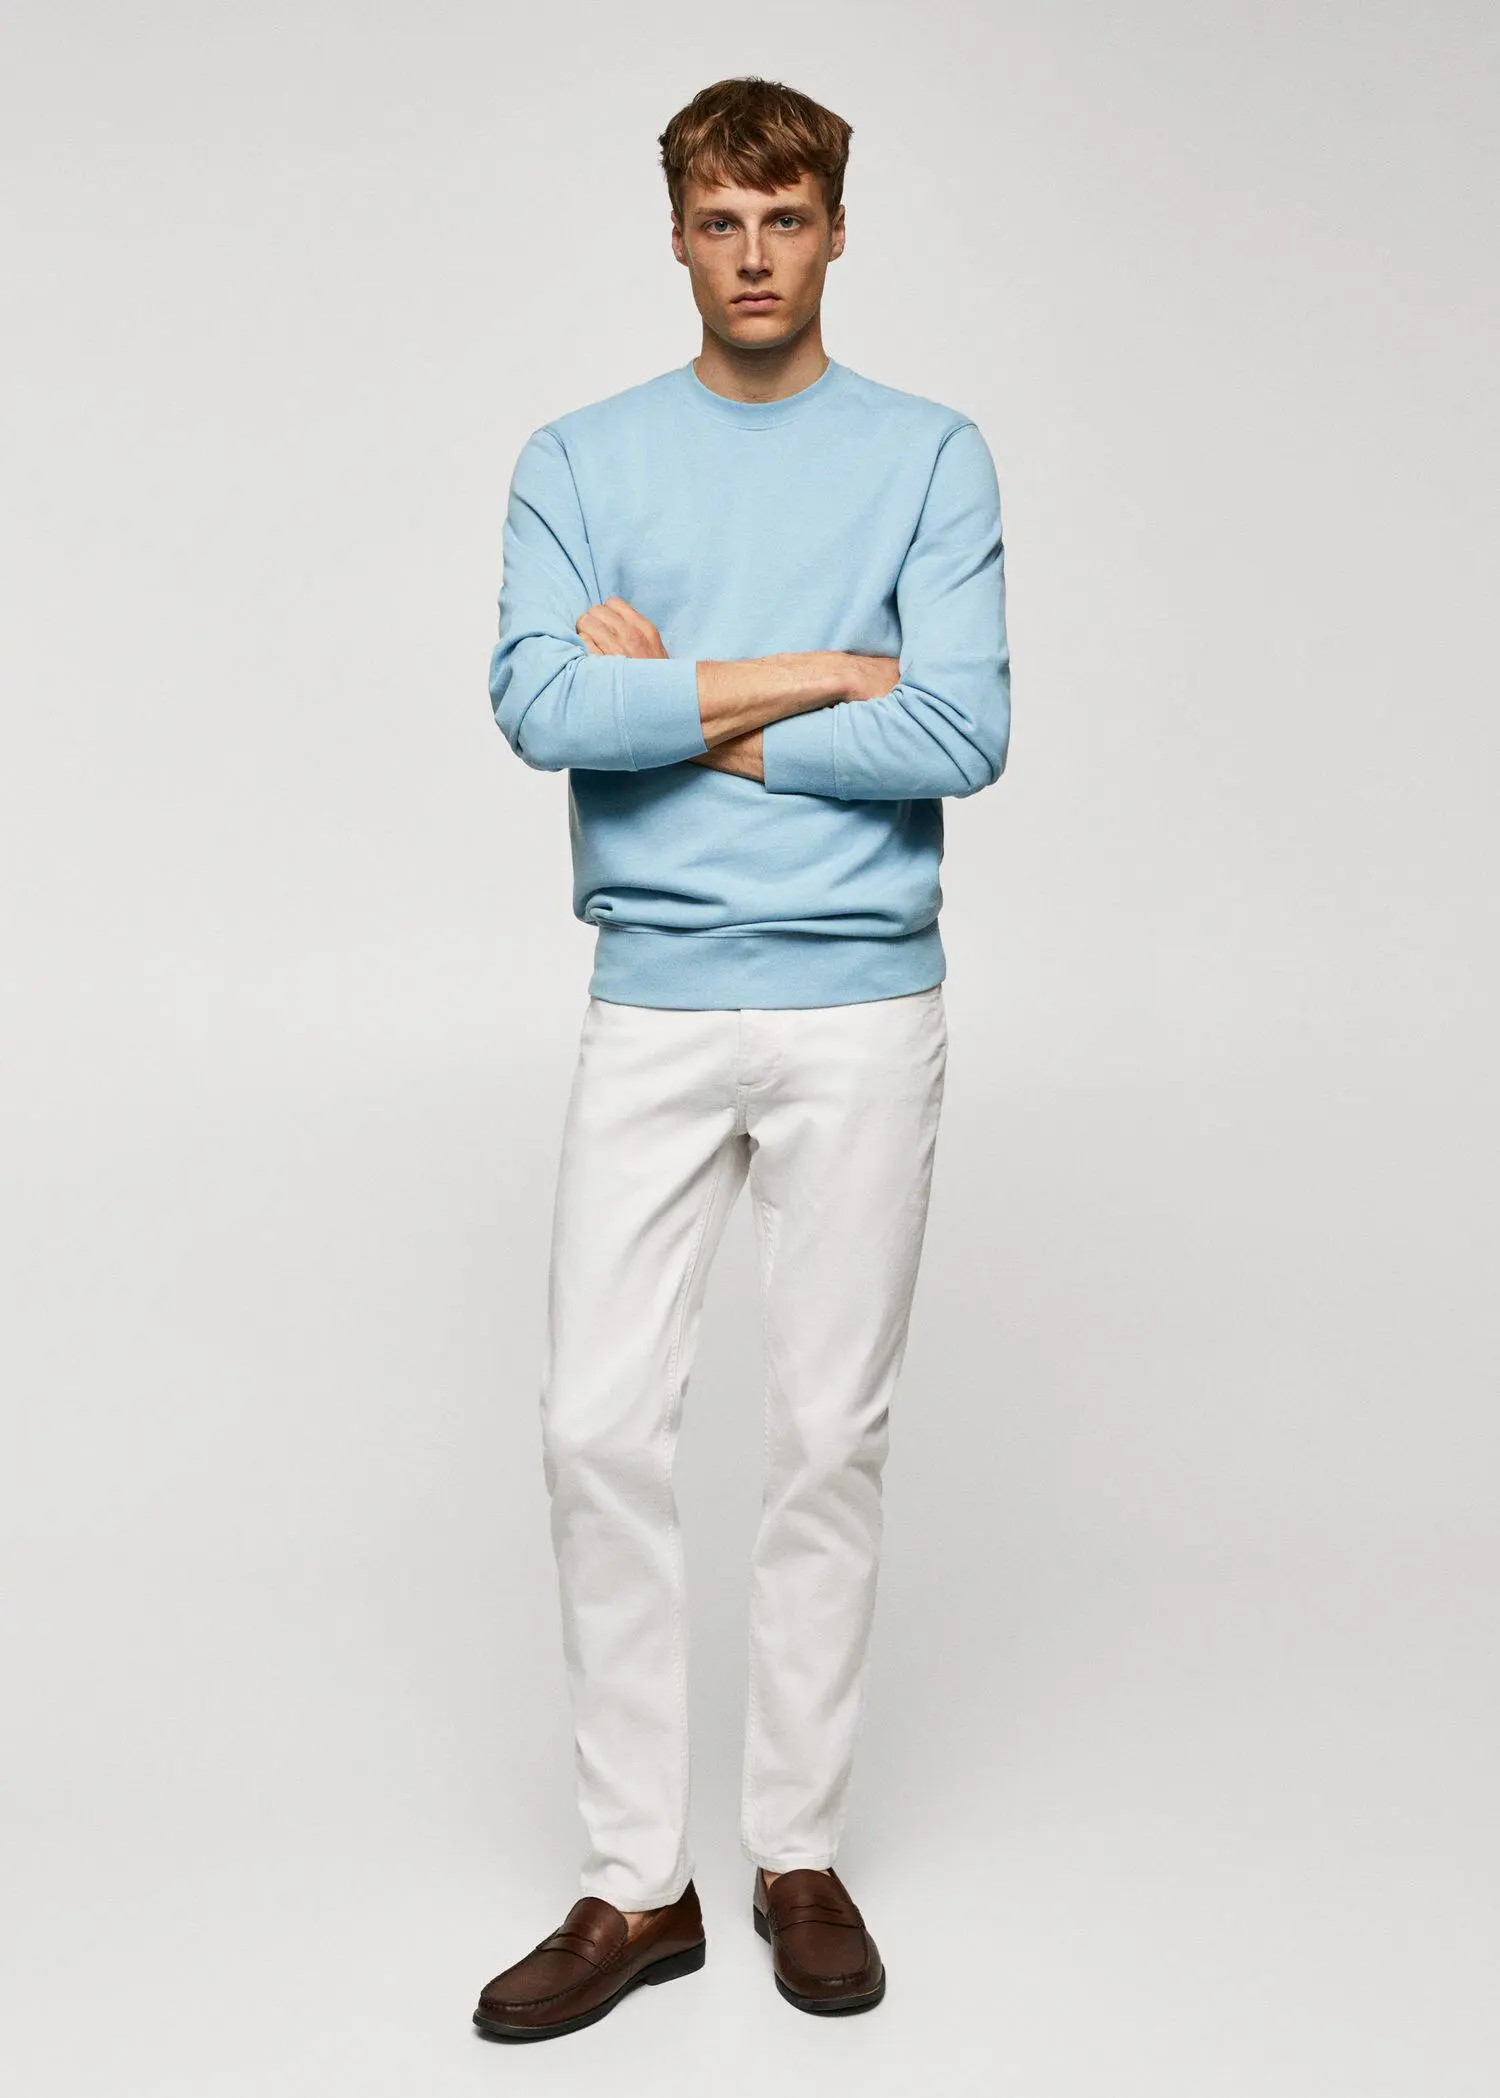 Mango 100% cotton basic sweatshirt . a man standing with his arms crossed wearing white pants. 